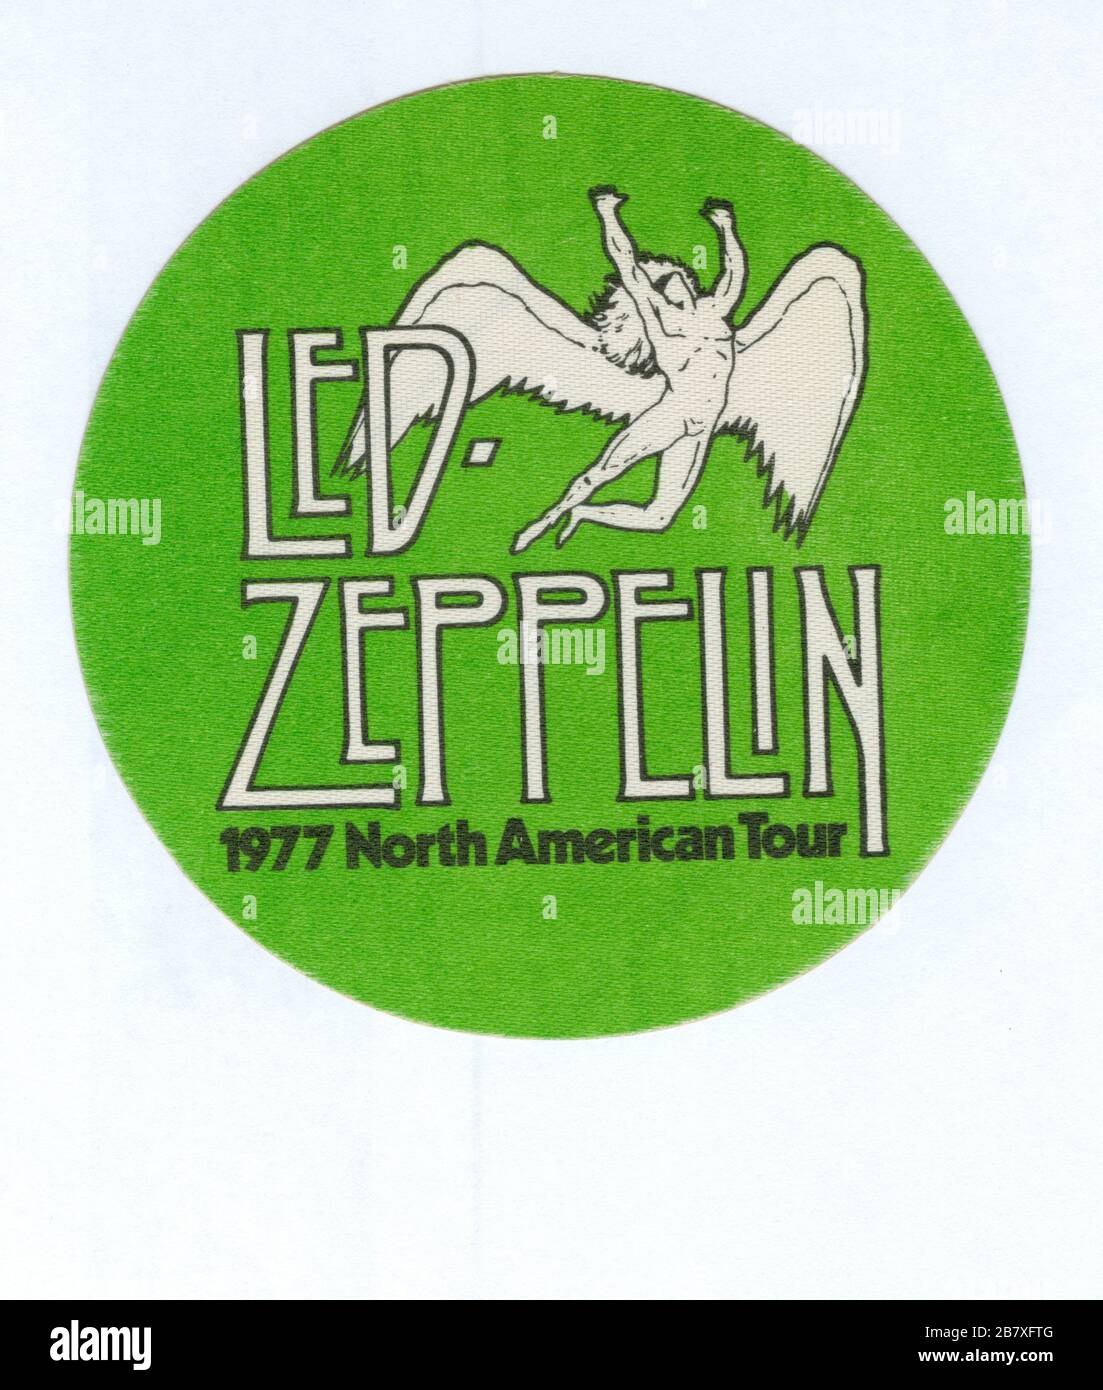 Led Zeppelin's official Backstage Pass from their concert at the Chicago Stadium show at Chicago, Illinois on April 7, 1977. This pass was actually Zeppelin's own touring pass. This was not unusual that year, but earlier in the 1970s most bands did not print their own passes.  To see my other Music-related vintage images, Search:  Prestor vintage music Stock Photo